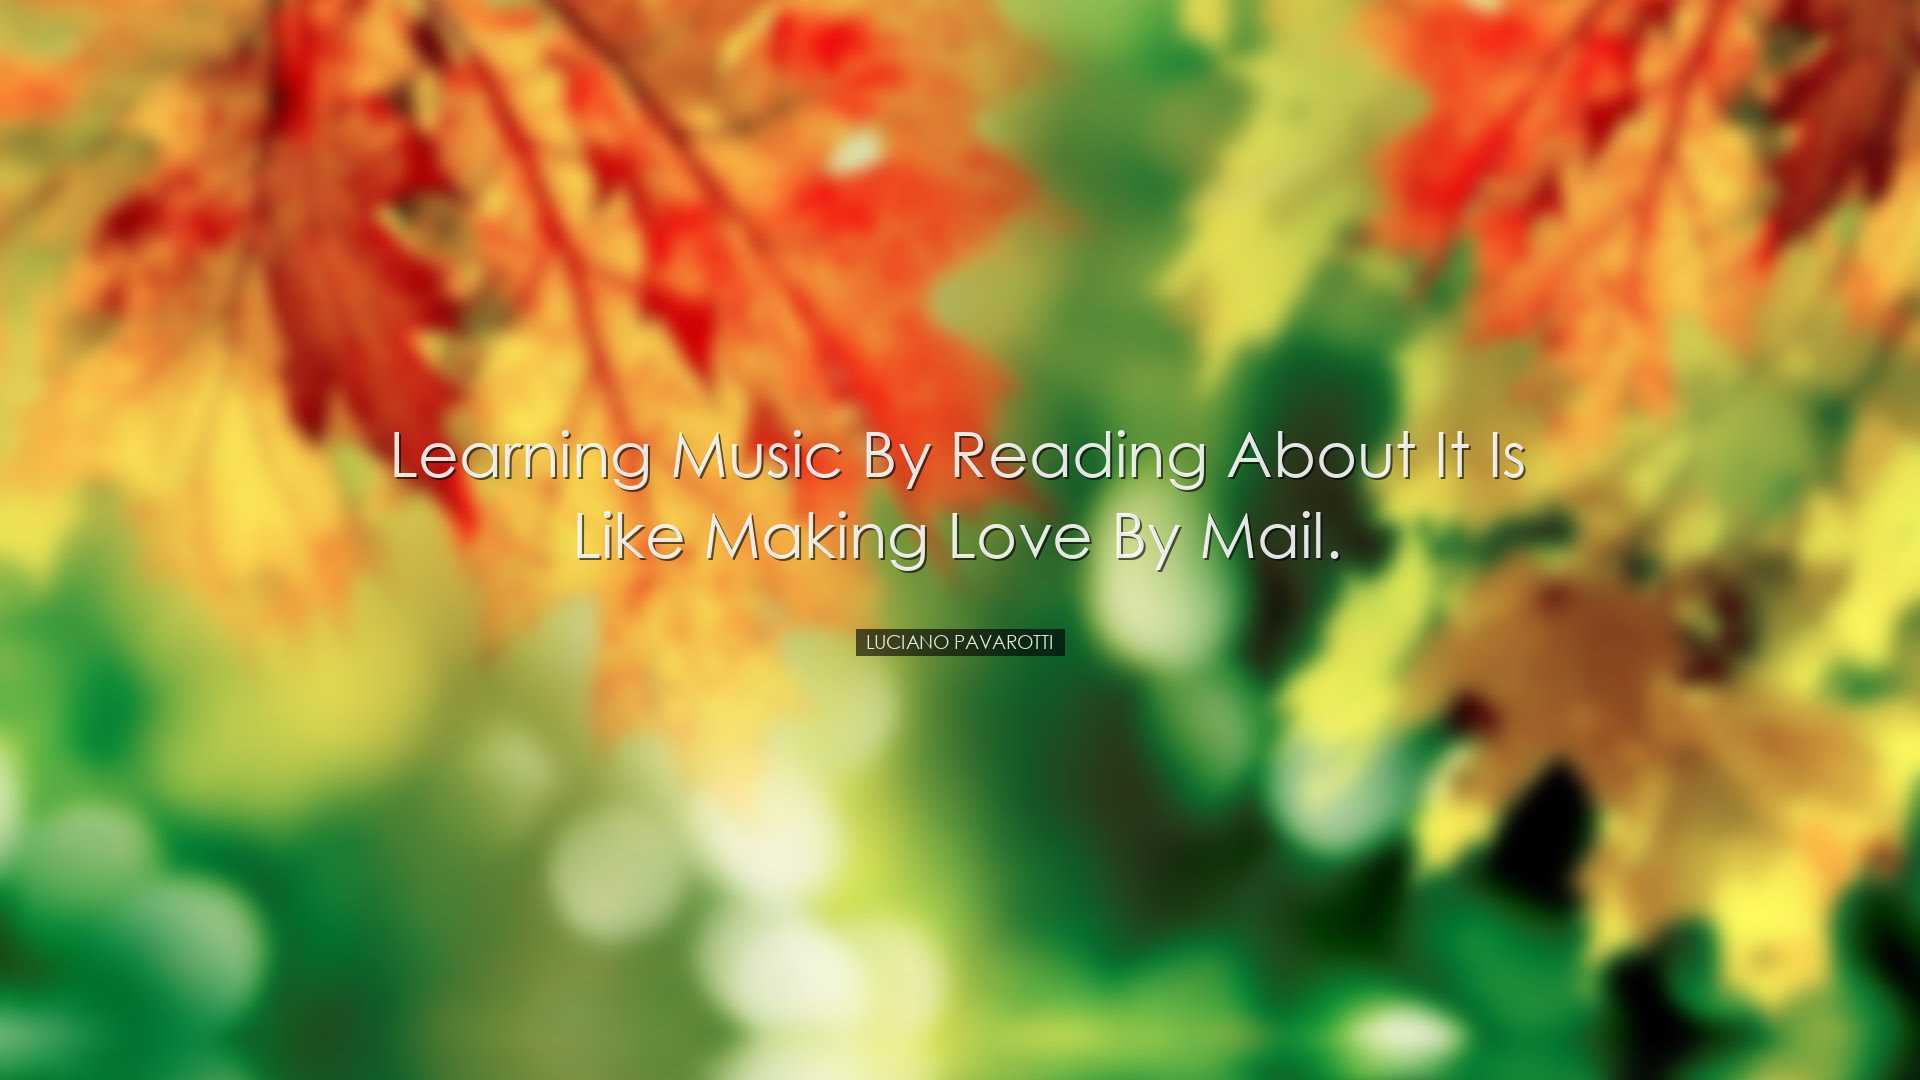 Learning music by reading about it is like making love by mail. -